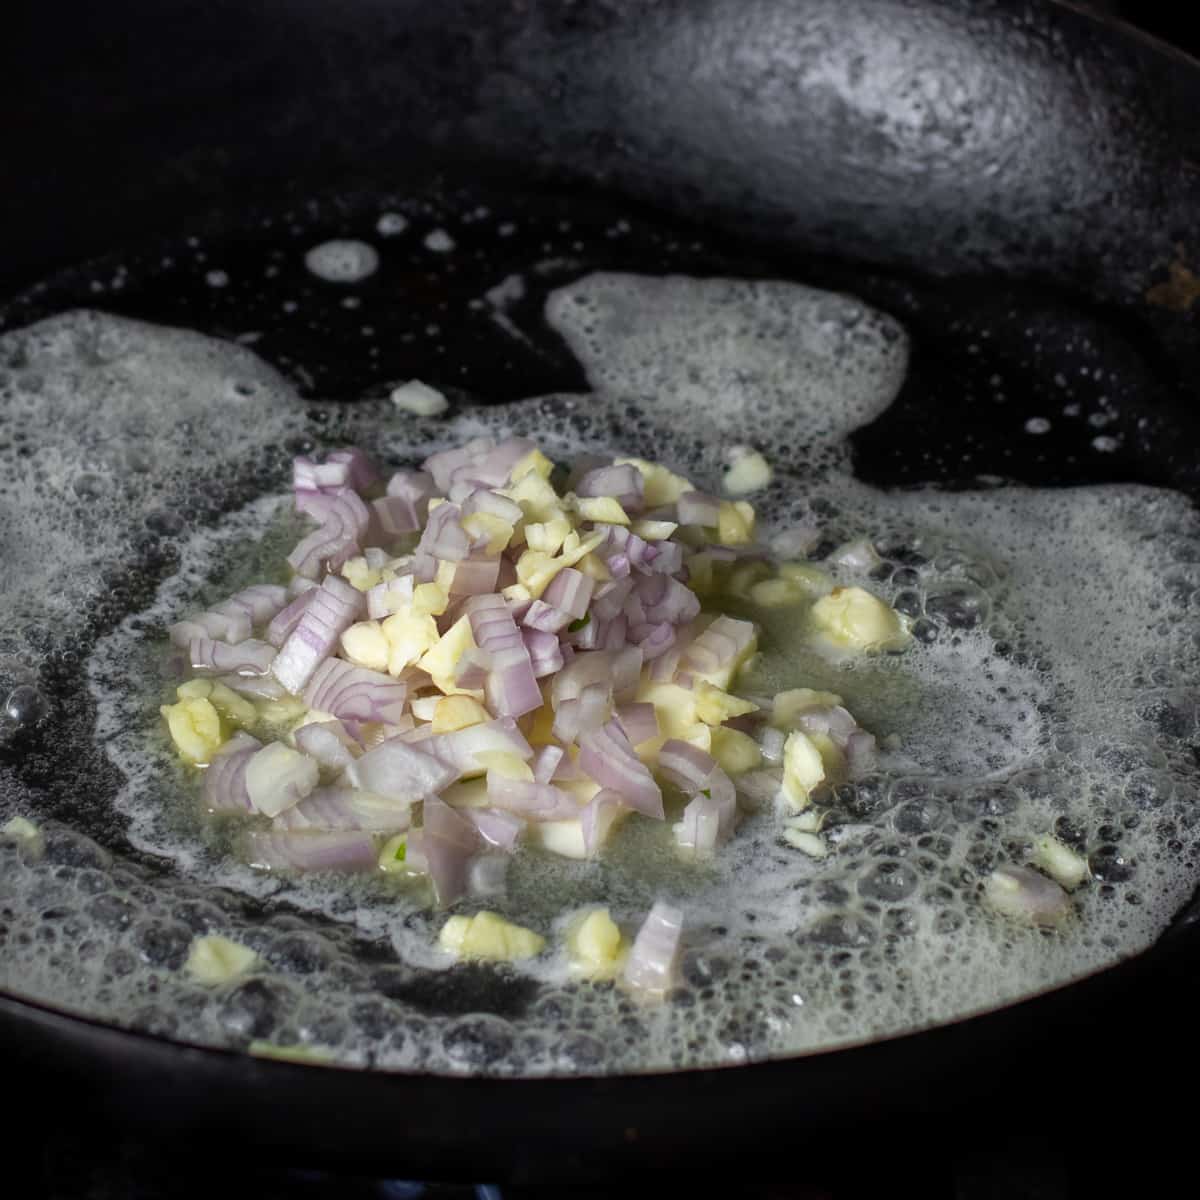 A minced shallot and garlic in a frying pan with melted butter.